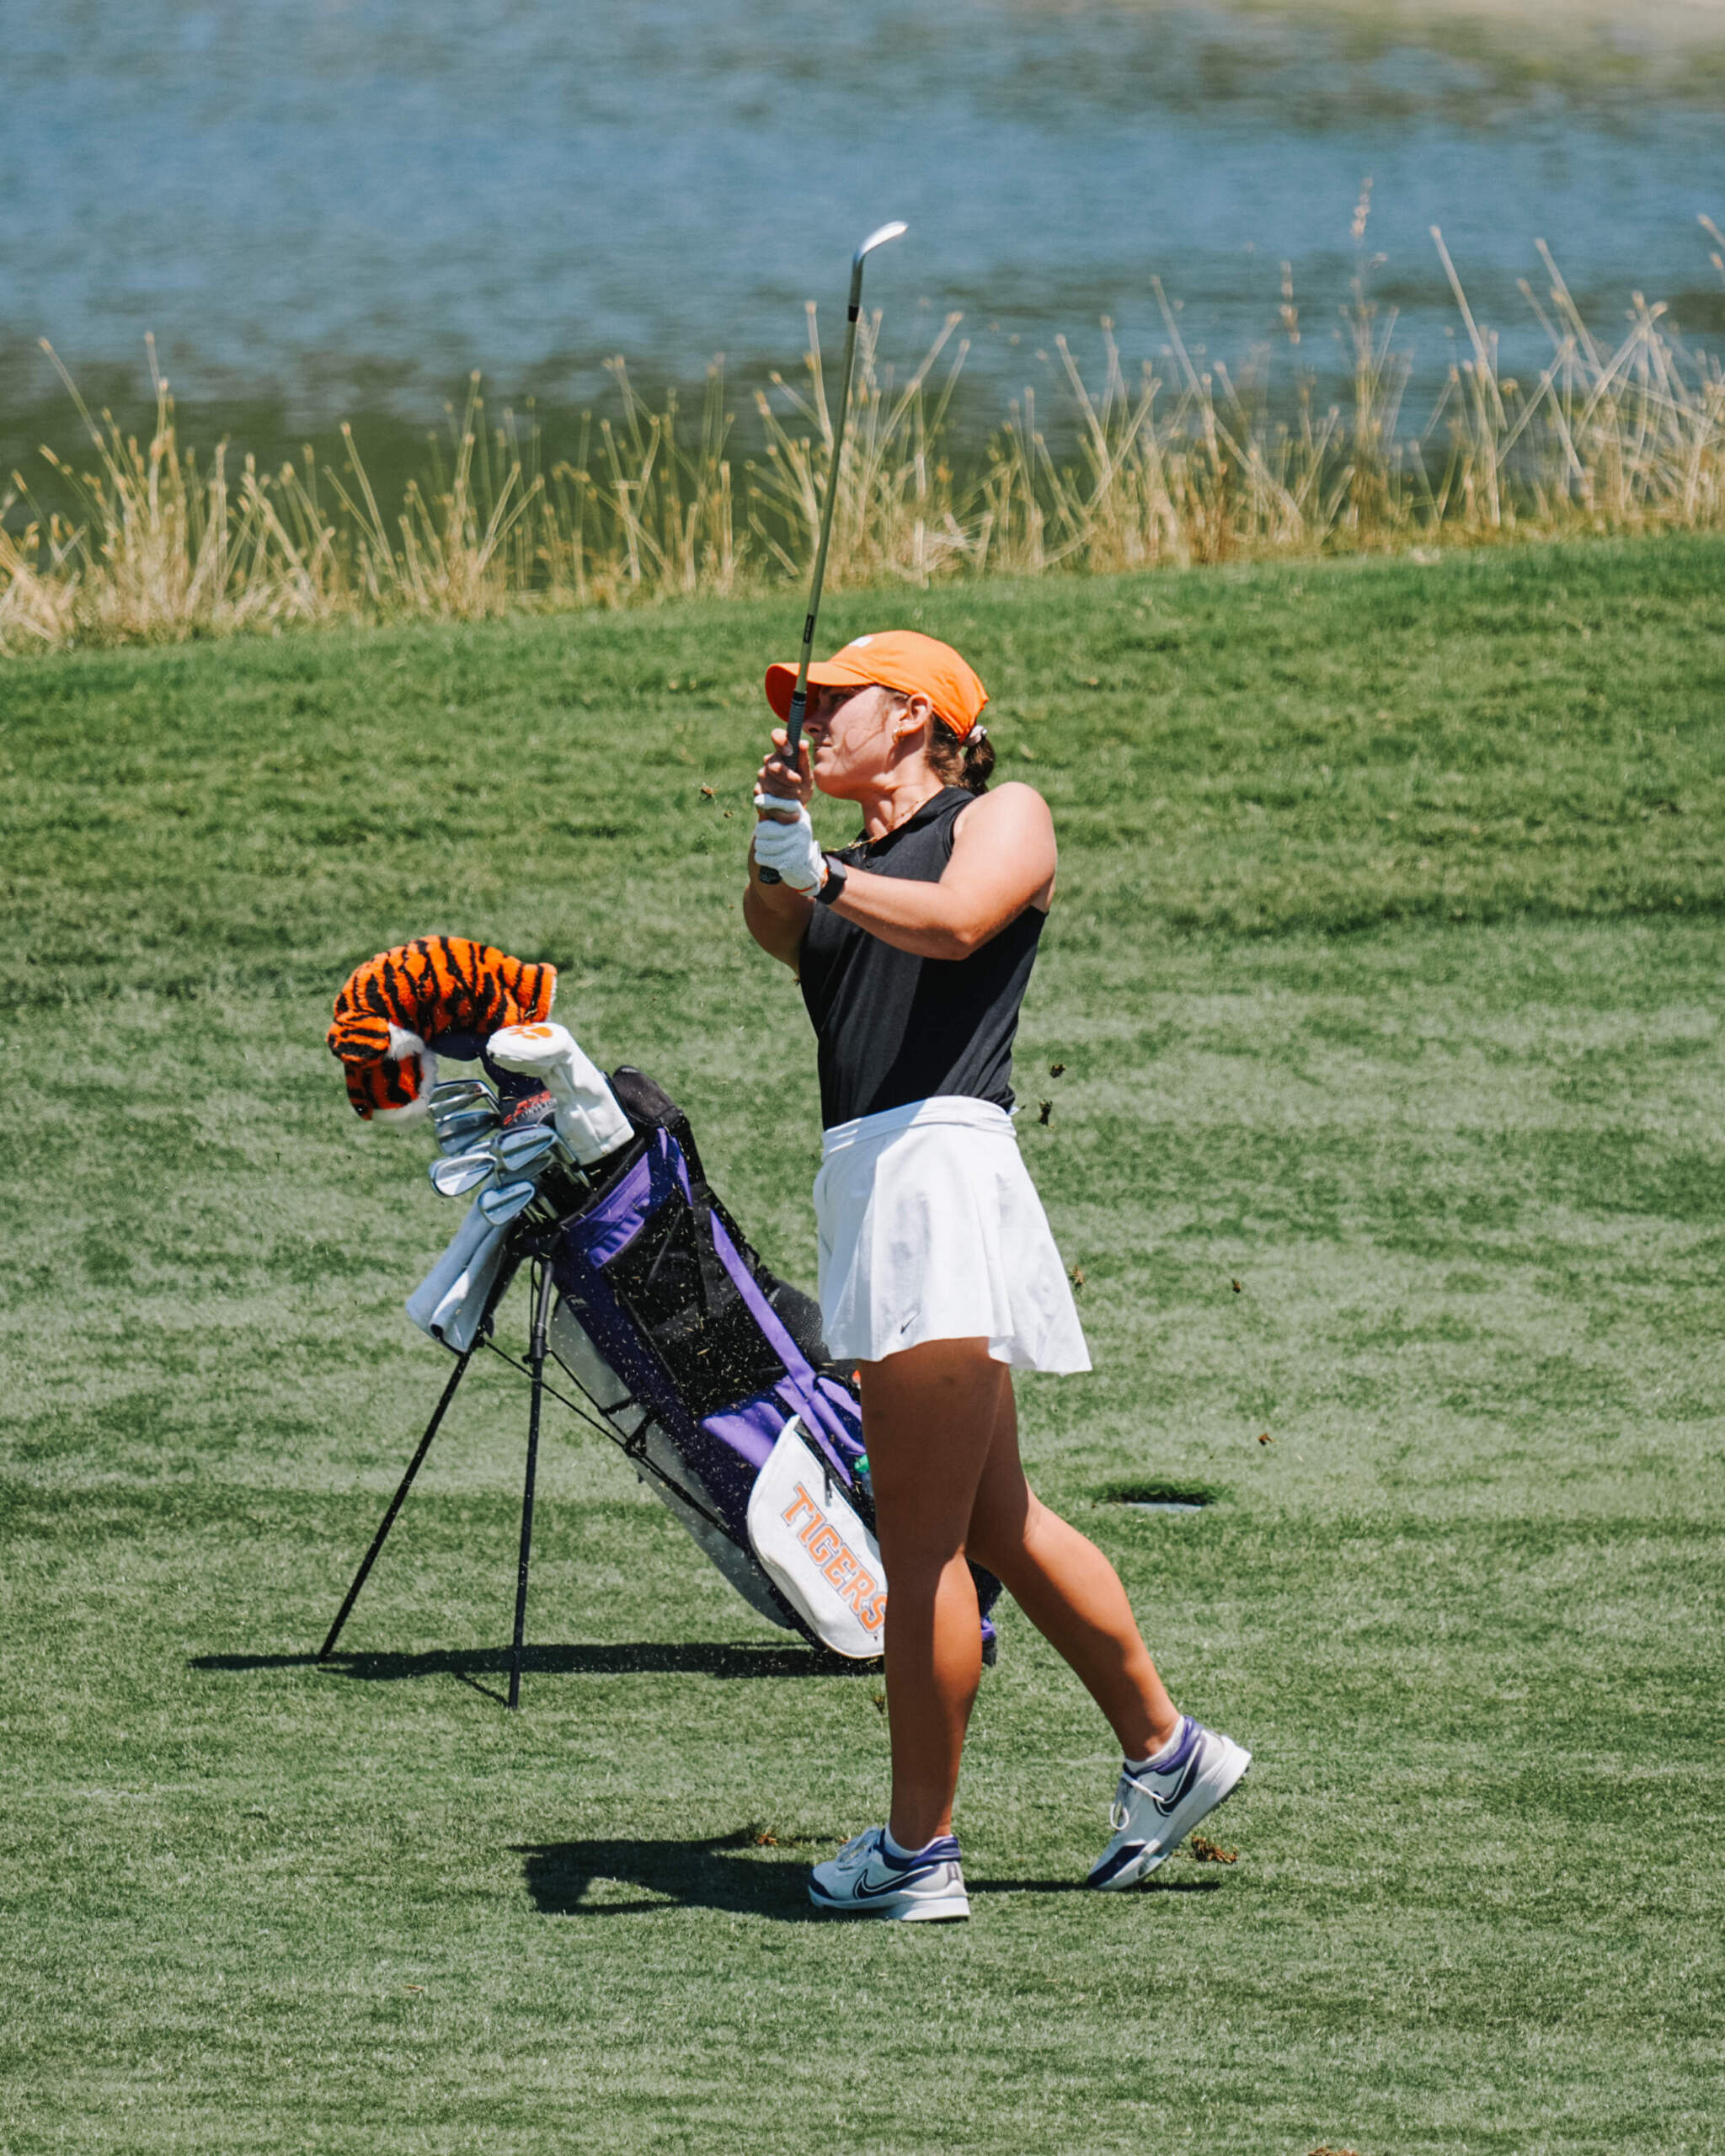 Women’s Golf Third Following Two Rounds of Stroke Play at NCAA Championship